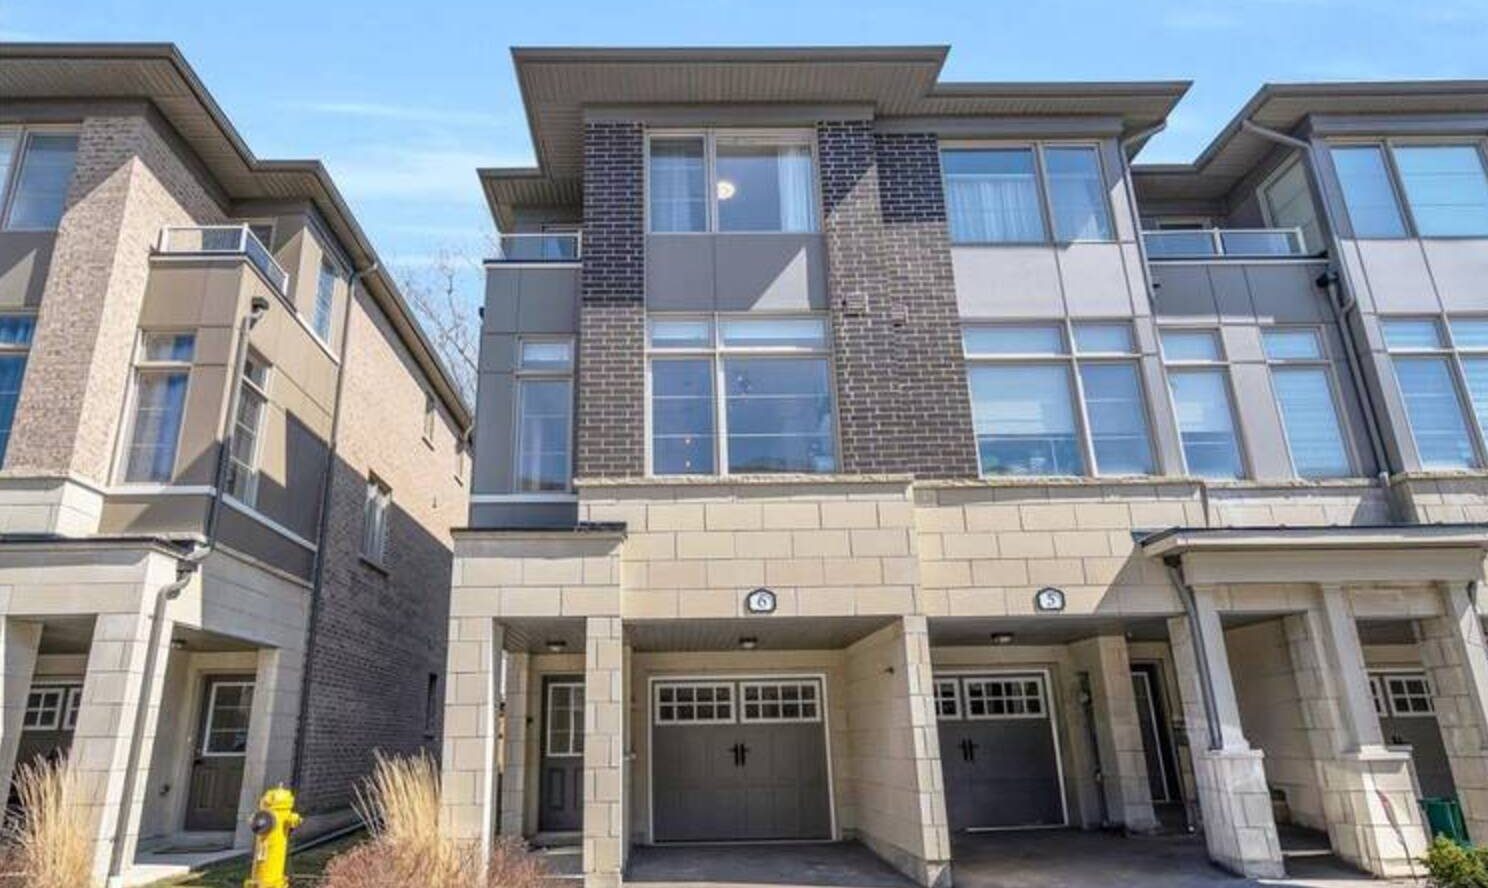 Home sales on the rise in the east from Pickering to Belleville – Oshawa still Durham's leader